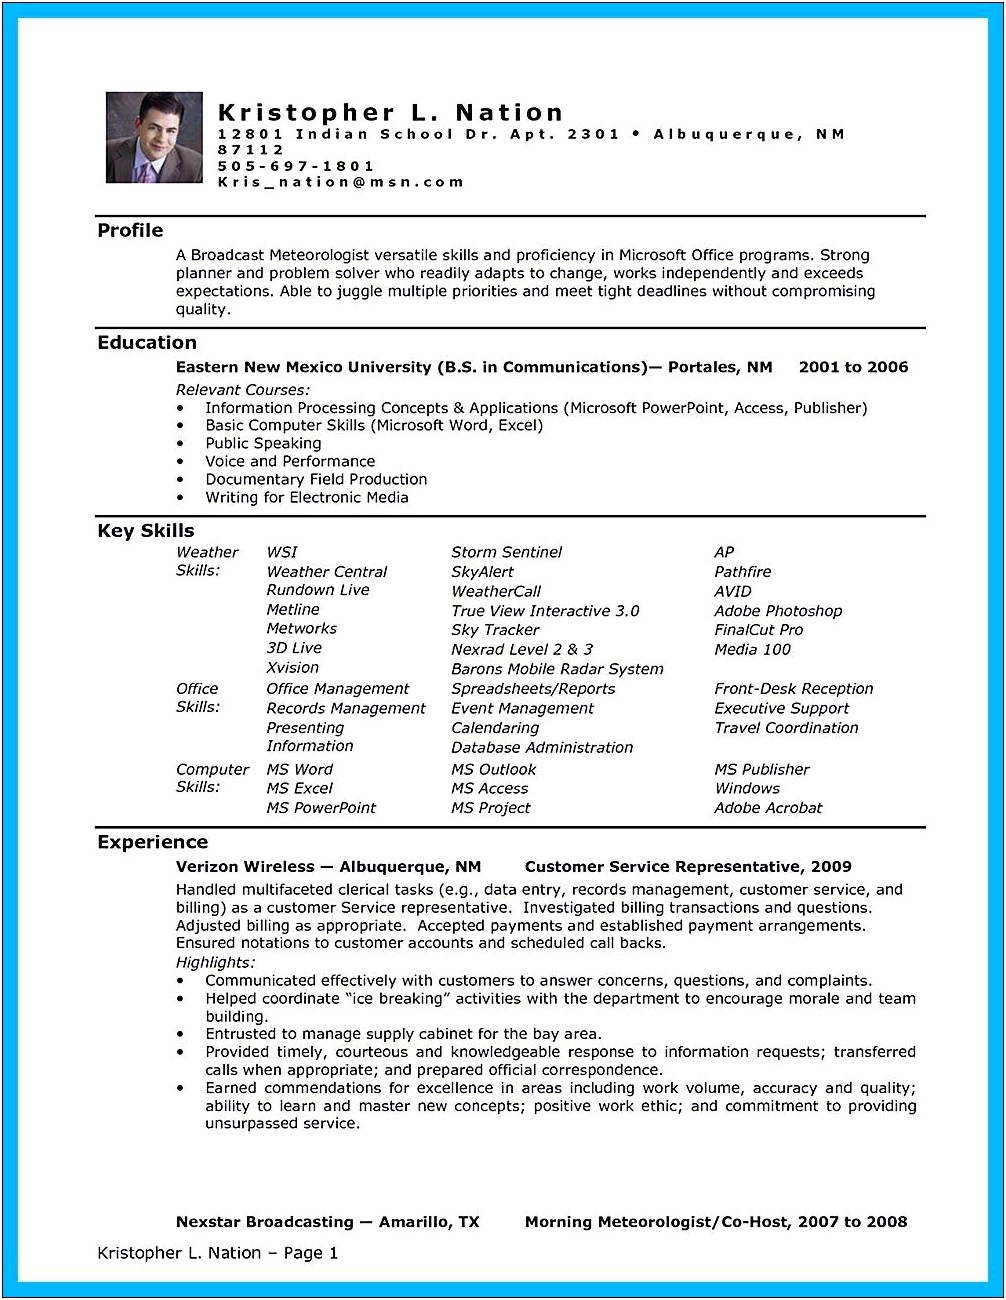 Free Sample Of Medical Assistant Resume